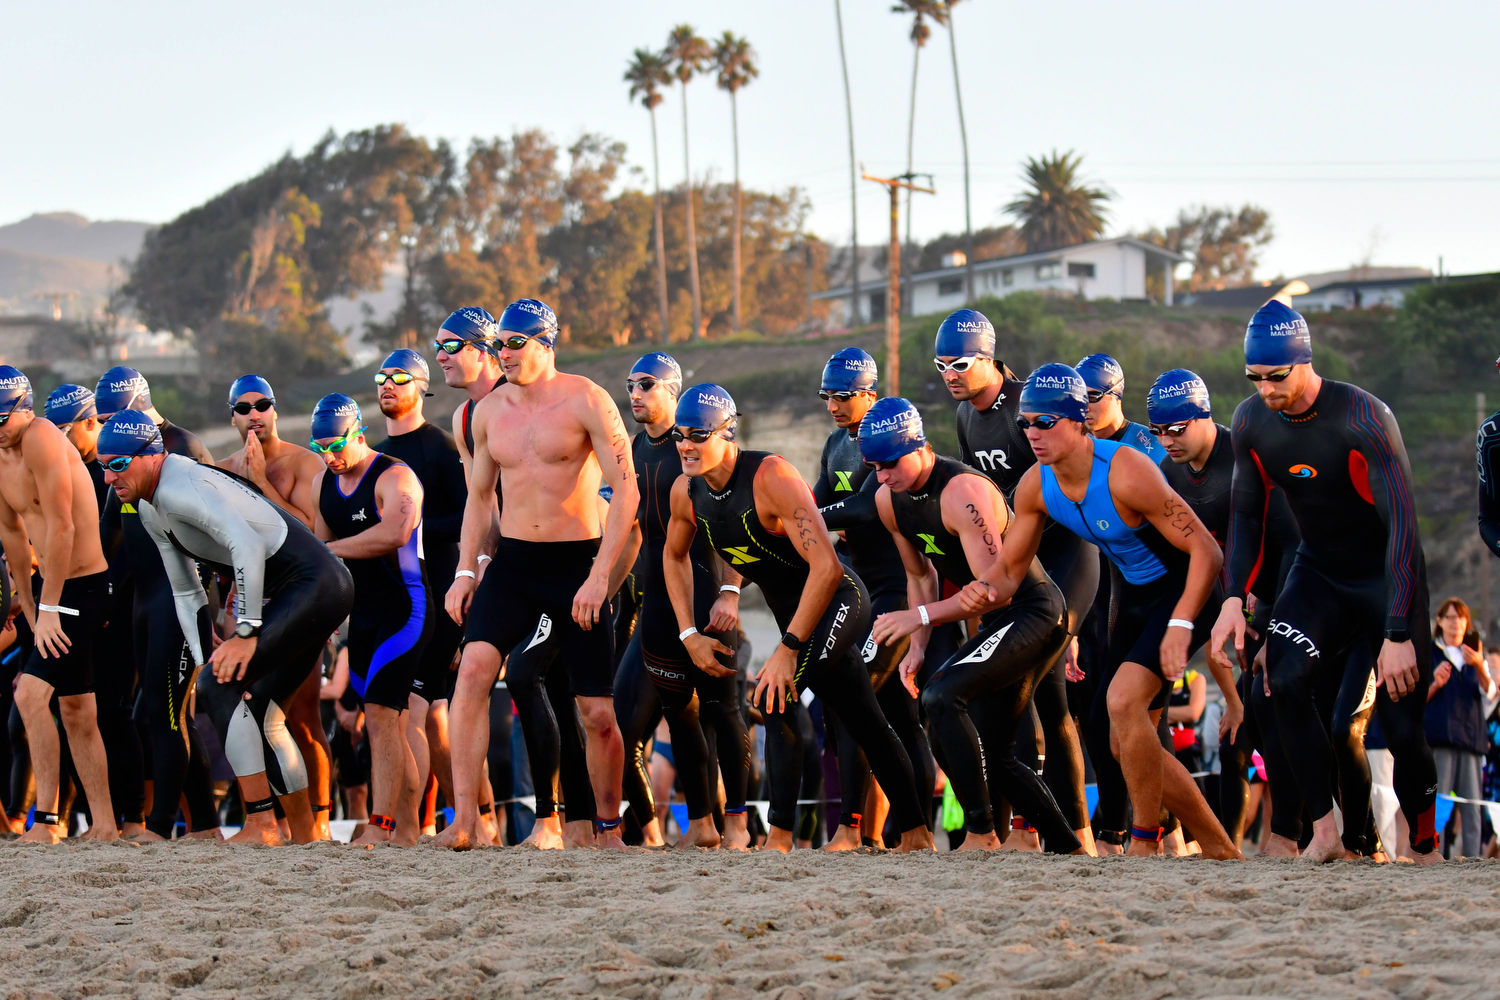 The USAT Tri for Real #1 Olympic Distance Triathlon